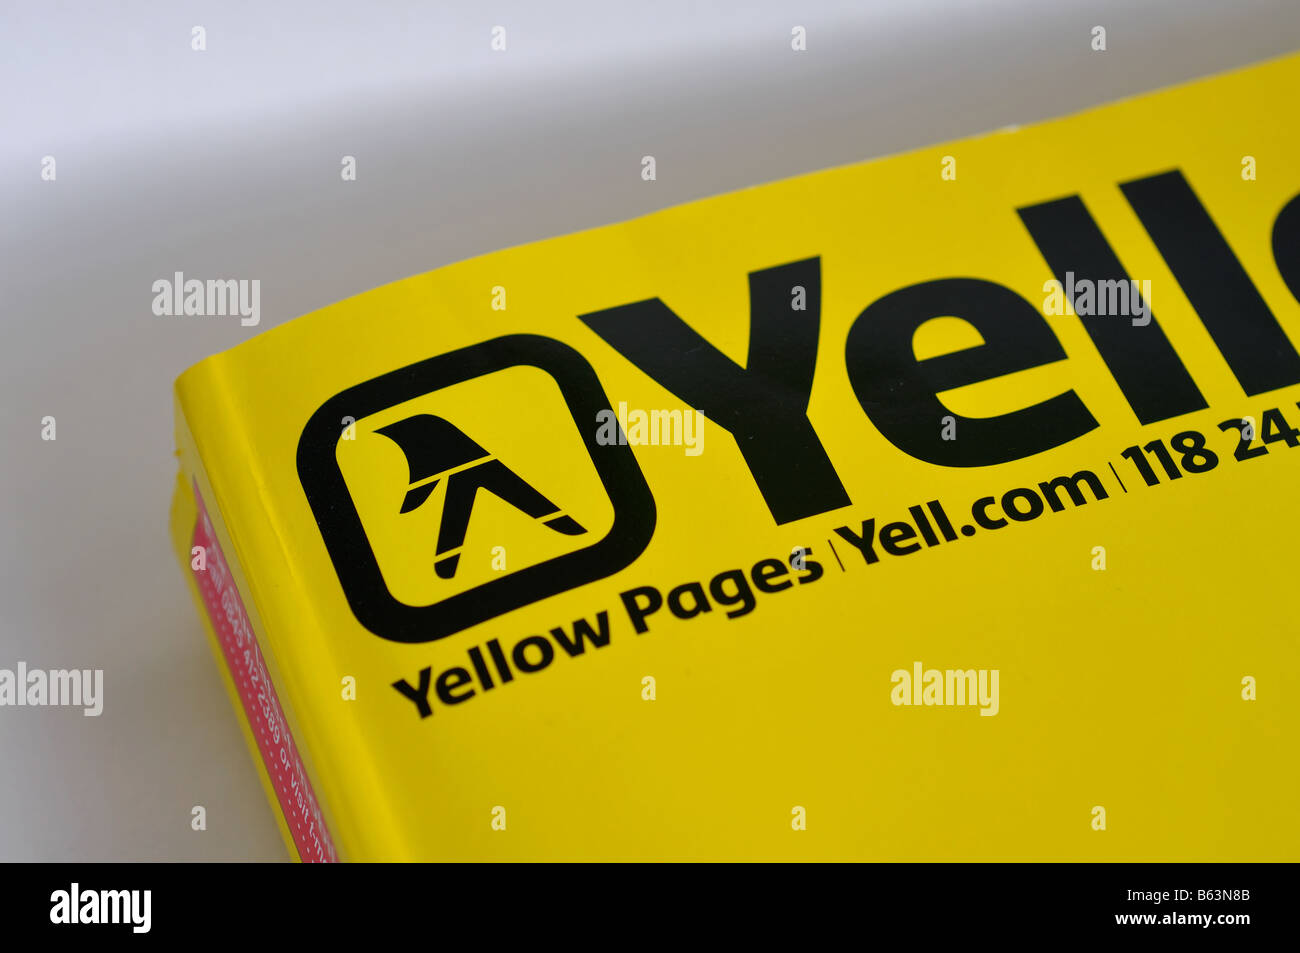 Yellow Pages Directory Uk B63N8B 